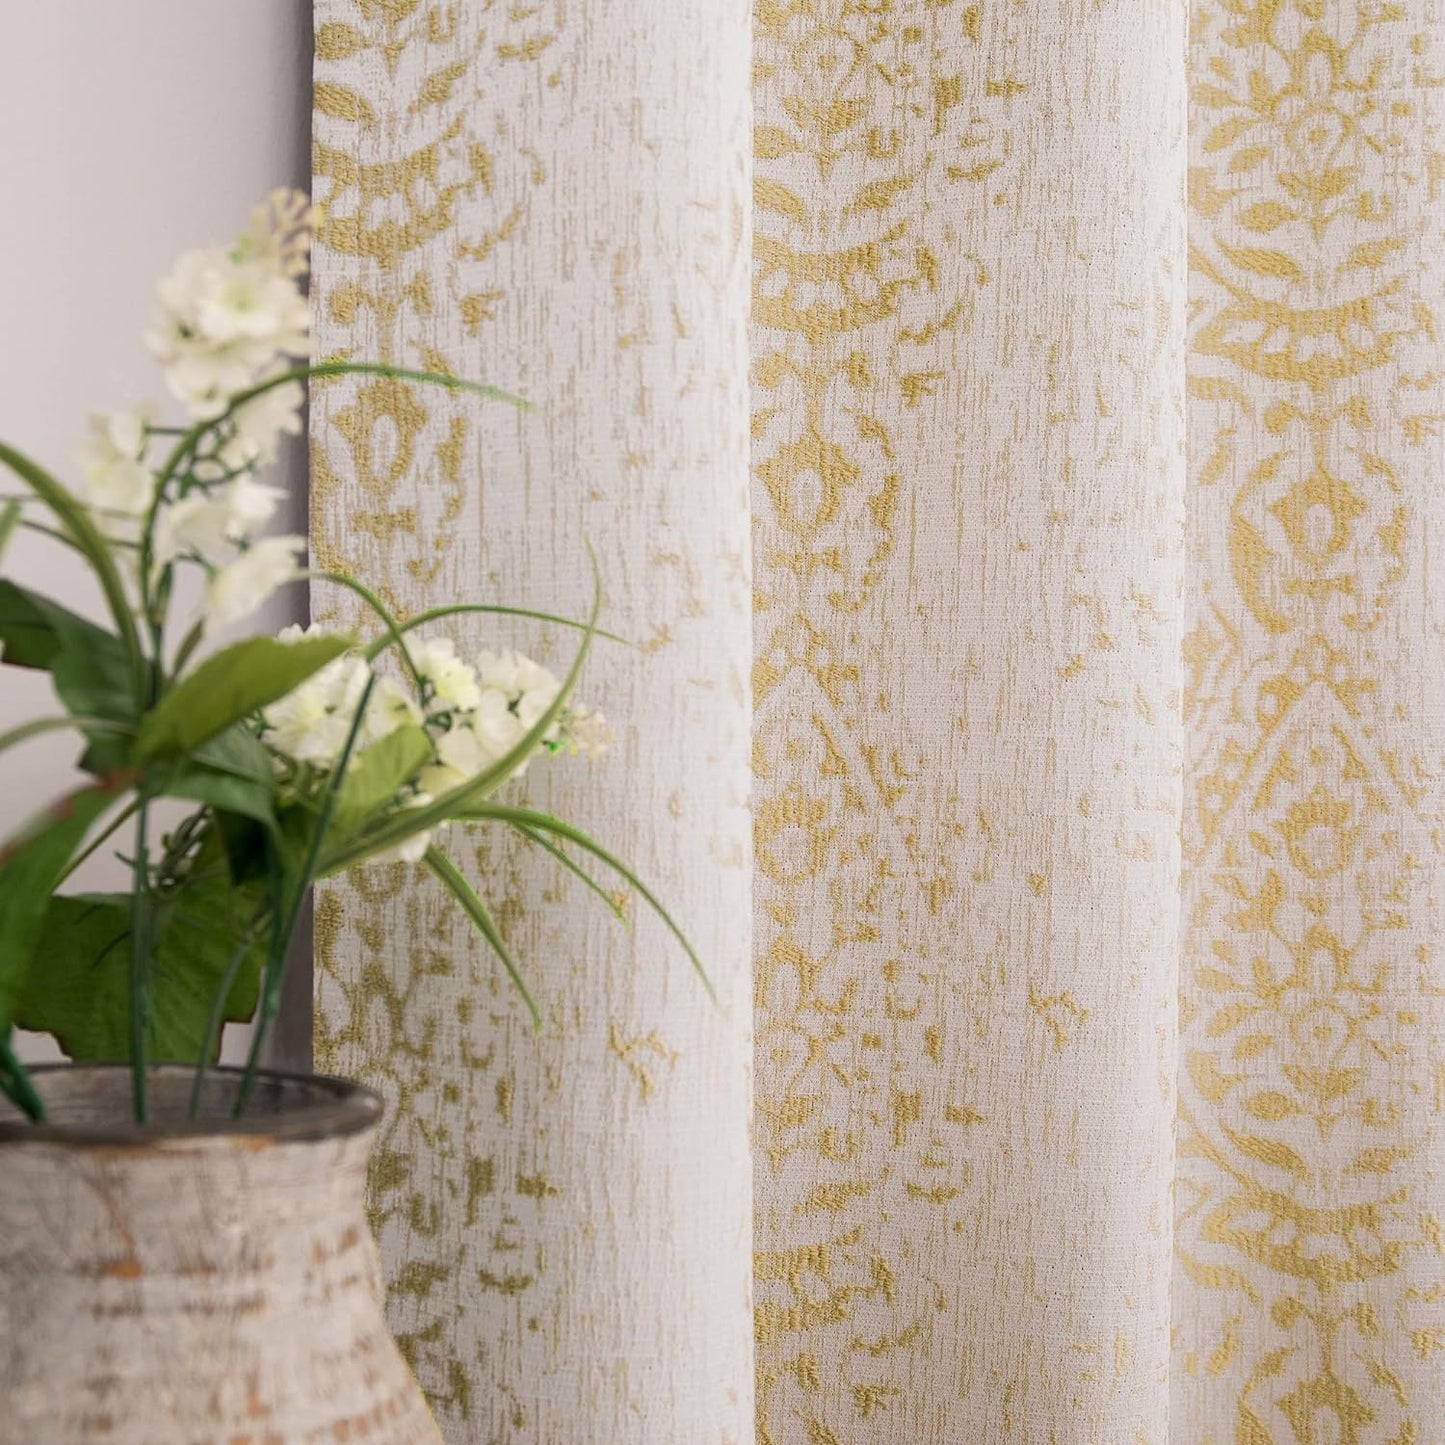 Off White Curtains 84 Inches Long for Bedroom Grommet Tone on Tone Design 3D Jacquard Embossed Damask Moroccan Pattern 50% Blackout Drapes for Living Room 84 Inch Length 2 Panels Set Cream  MRS.NATURALL TEXTILE Gold 52X84 